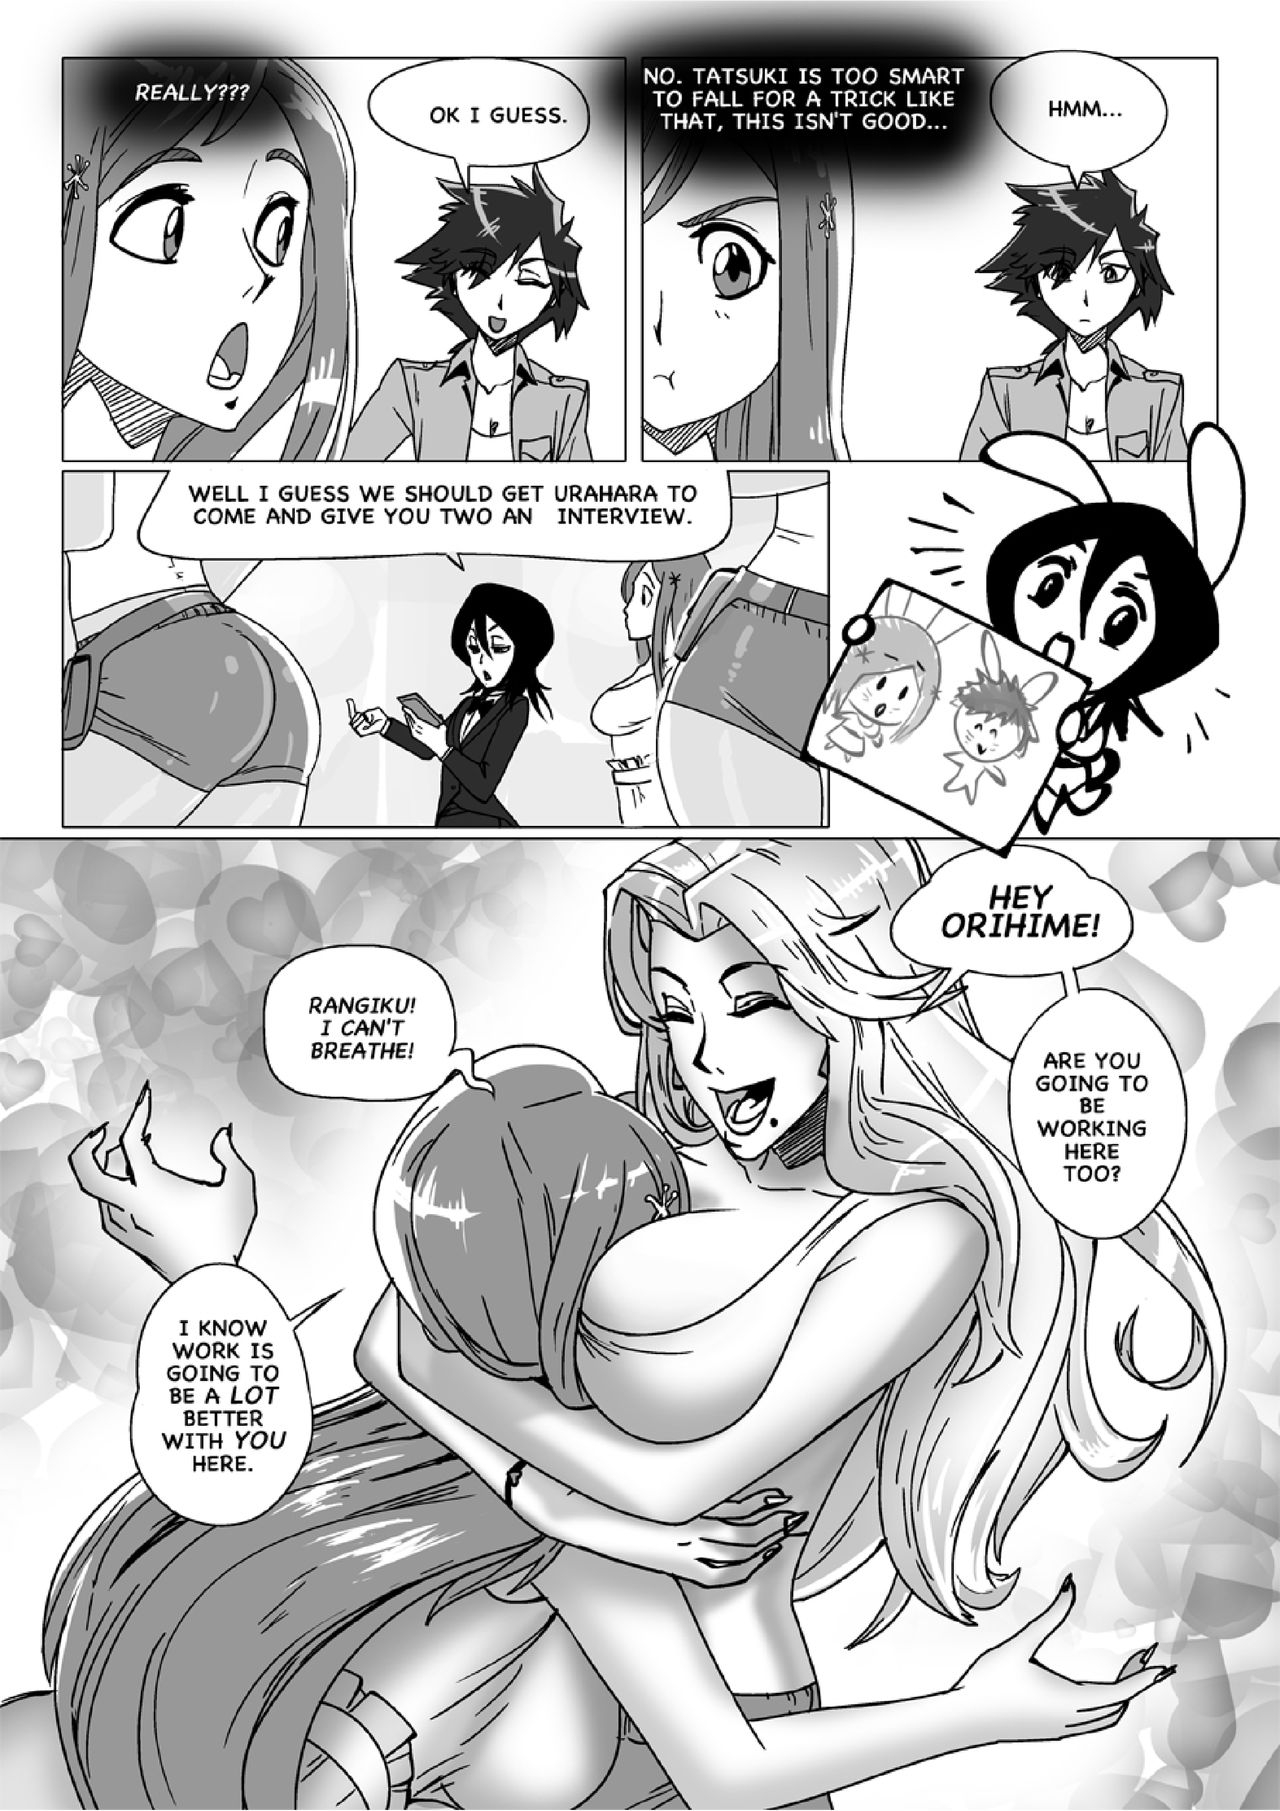 [Gairon] Happy to Serve You - Chapter 2 (Bleach) 4